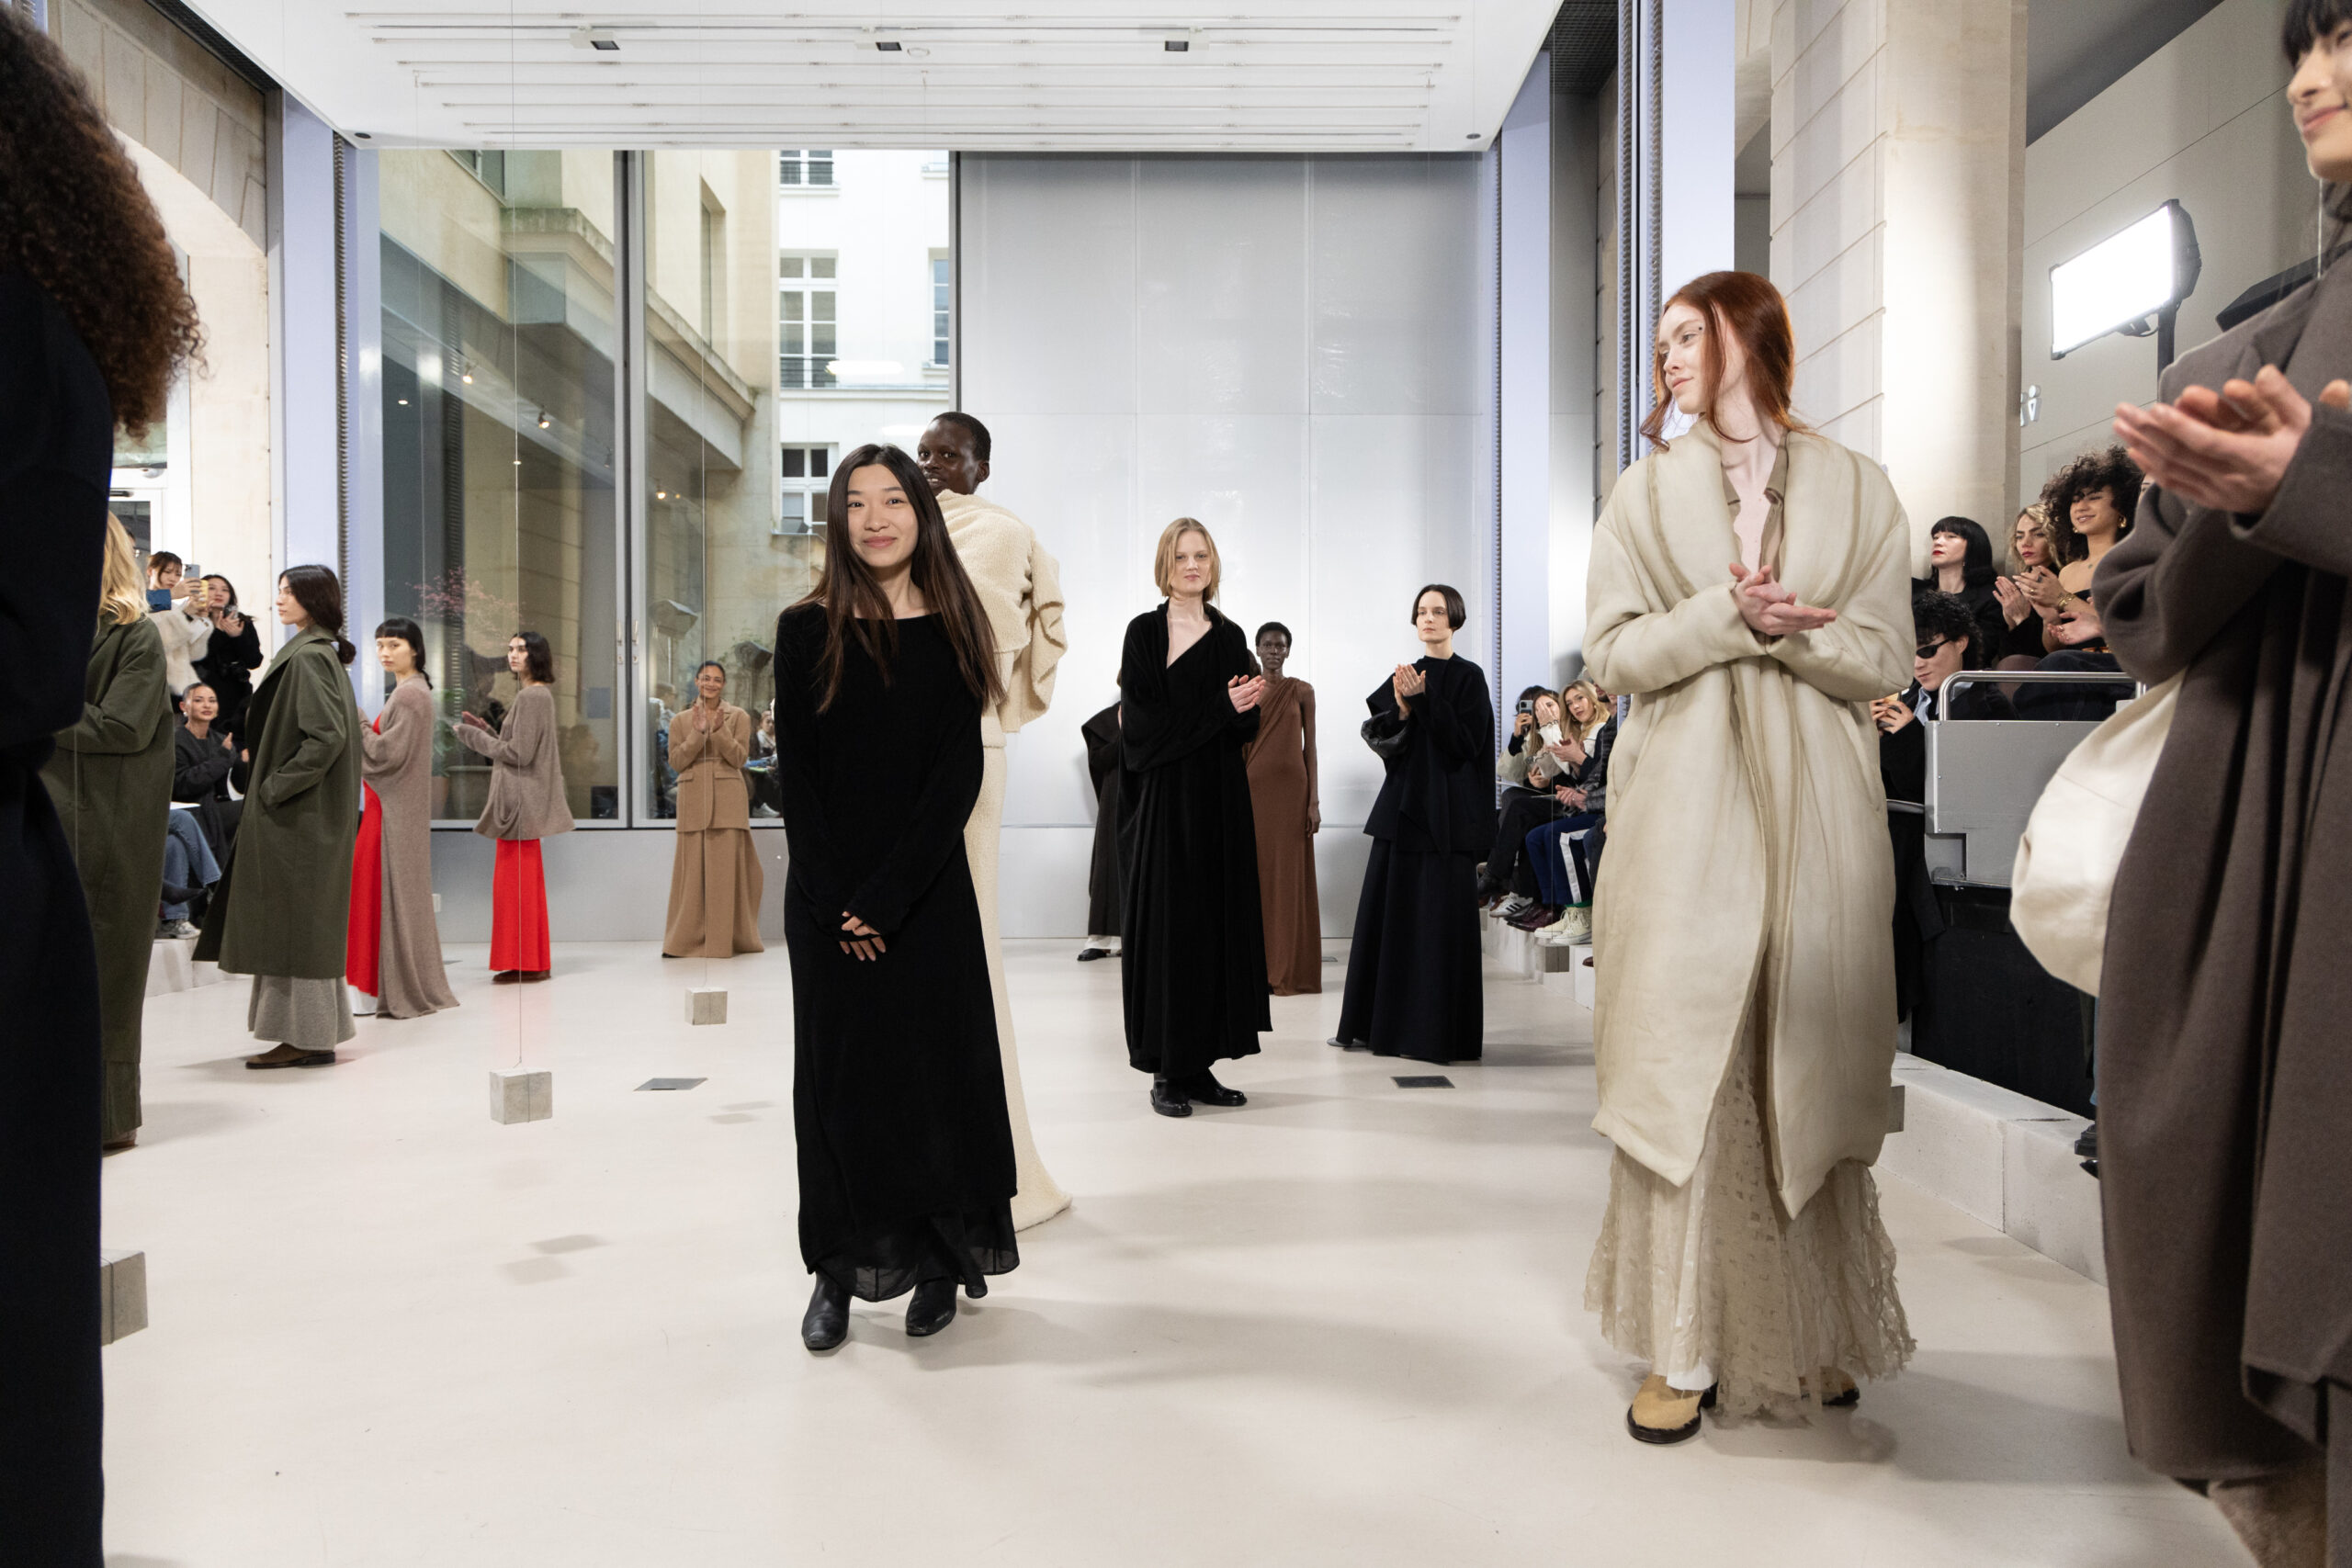 A fashion show finale with models in minimalist, geometric clothing standing in a bright indoor space with large windows, receiving applause from an audience.